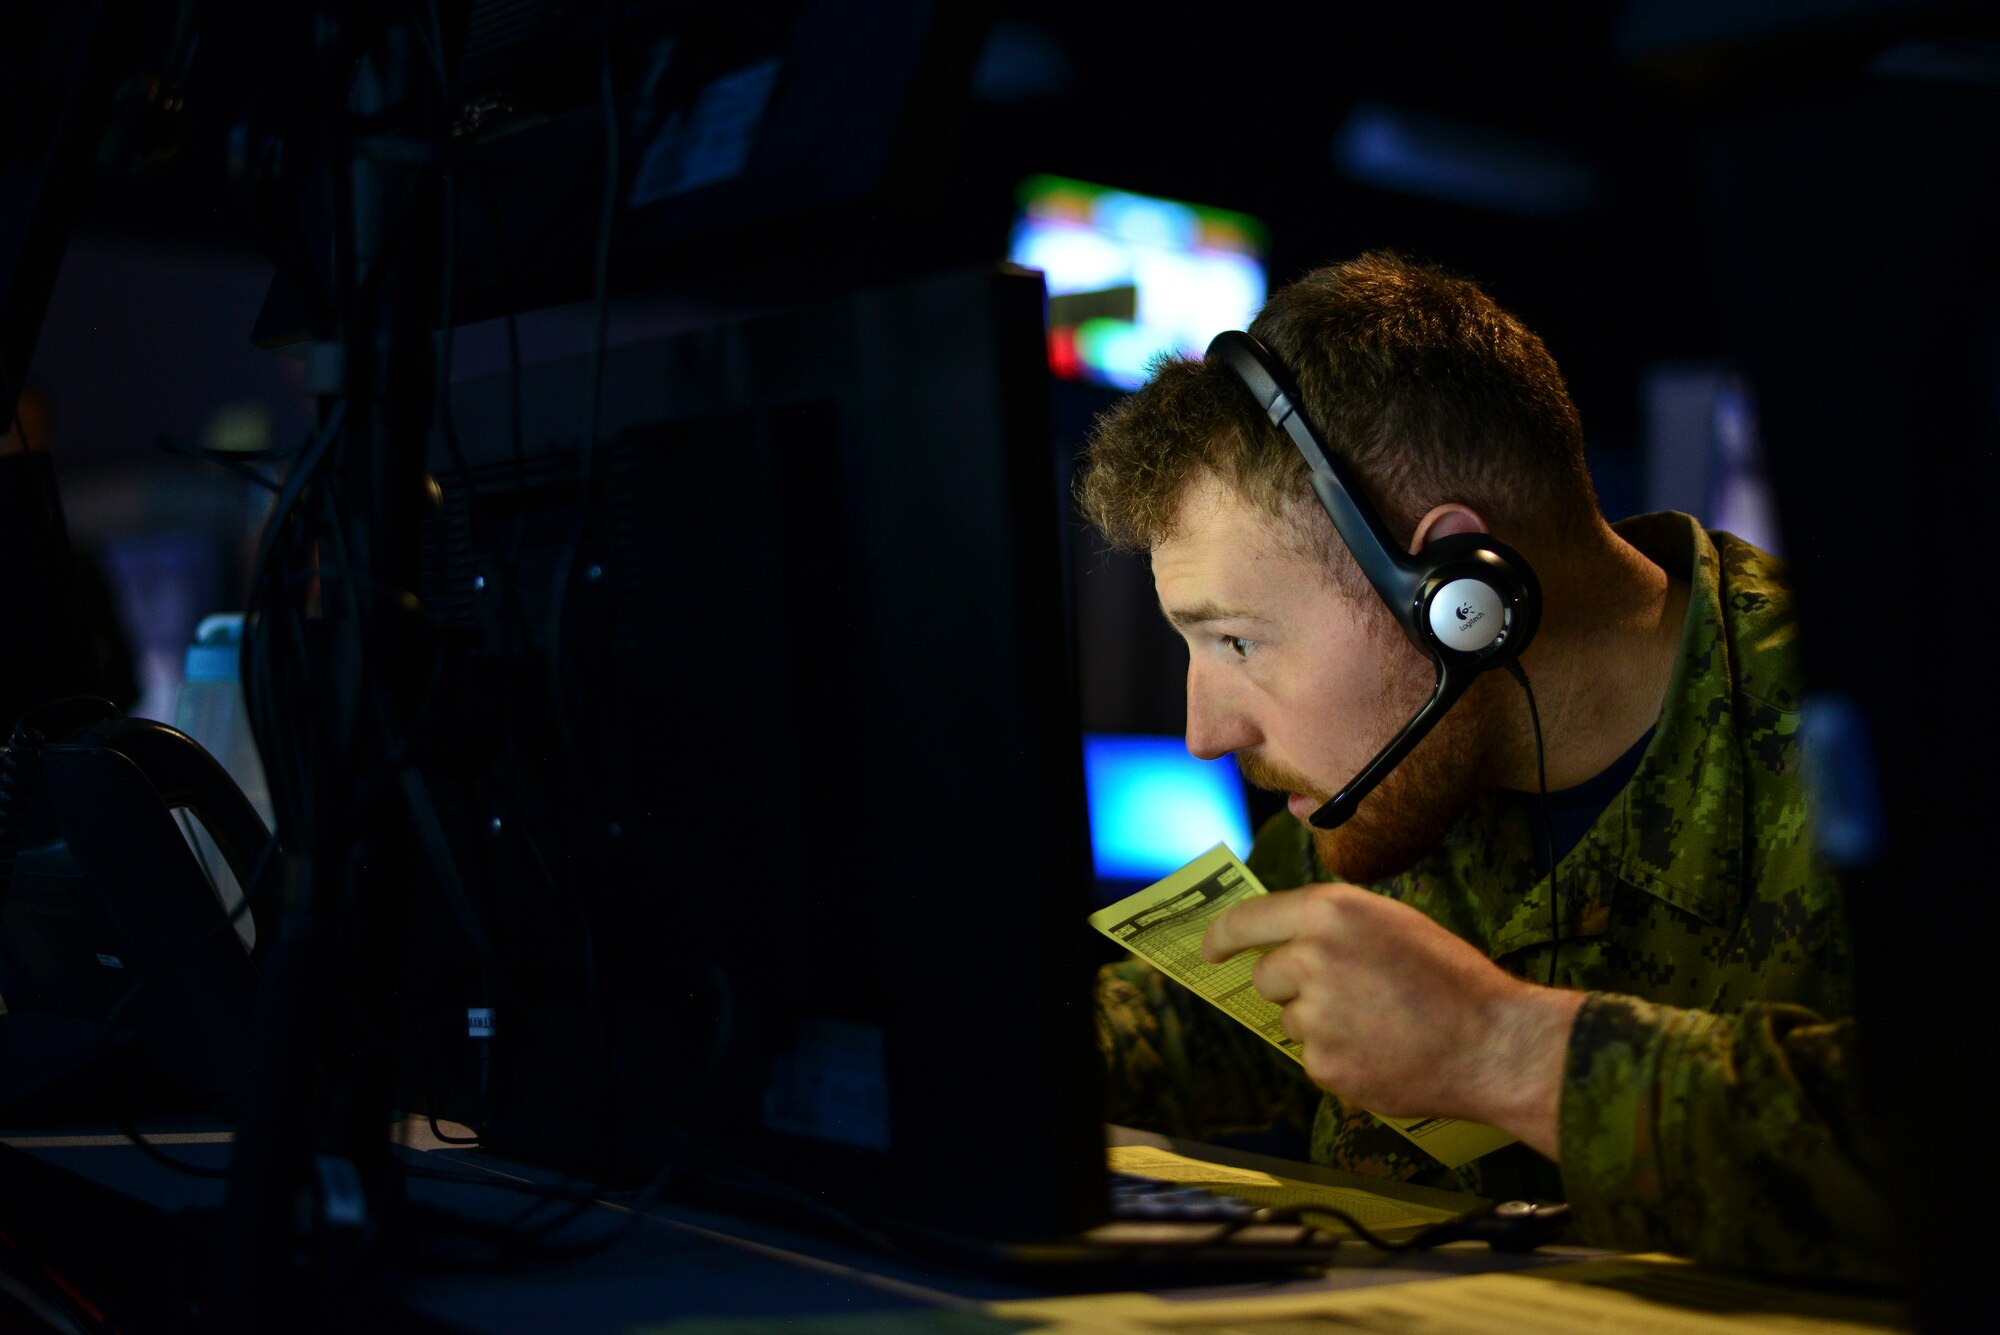 A member of the Royal Canadian Air Force takes part in the Exercise Coalition VIRTUAL FLAG 19-4 at Kirtland Air Force Base, N.M., Sept. 10, 2019. The synthetic battle spaces used numerous simulators to connect to 88 systems and 23 sites around the world, synchronizing multi-domain DoD weapon systems along with coalition partners including Canada, The United Kingdom and Australia. (U.S. Air Force photo by Staff Sgt. Kimberly Nagle)